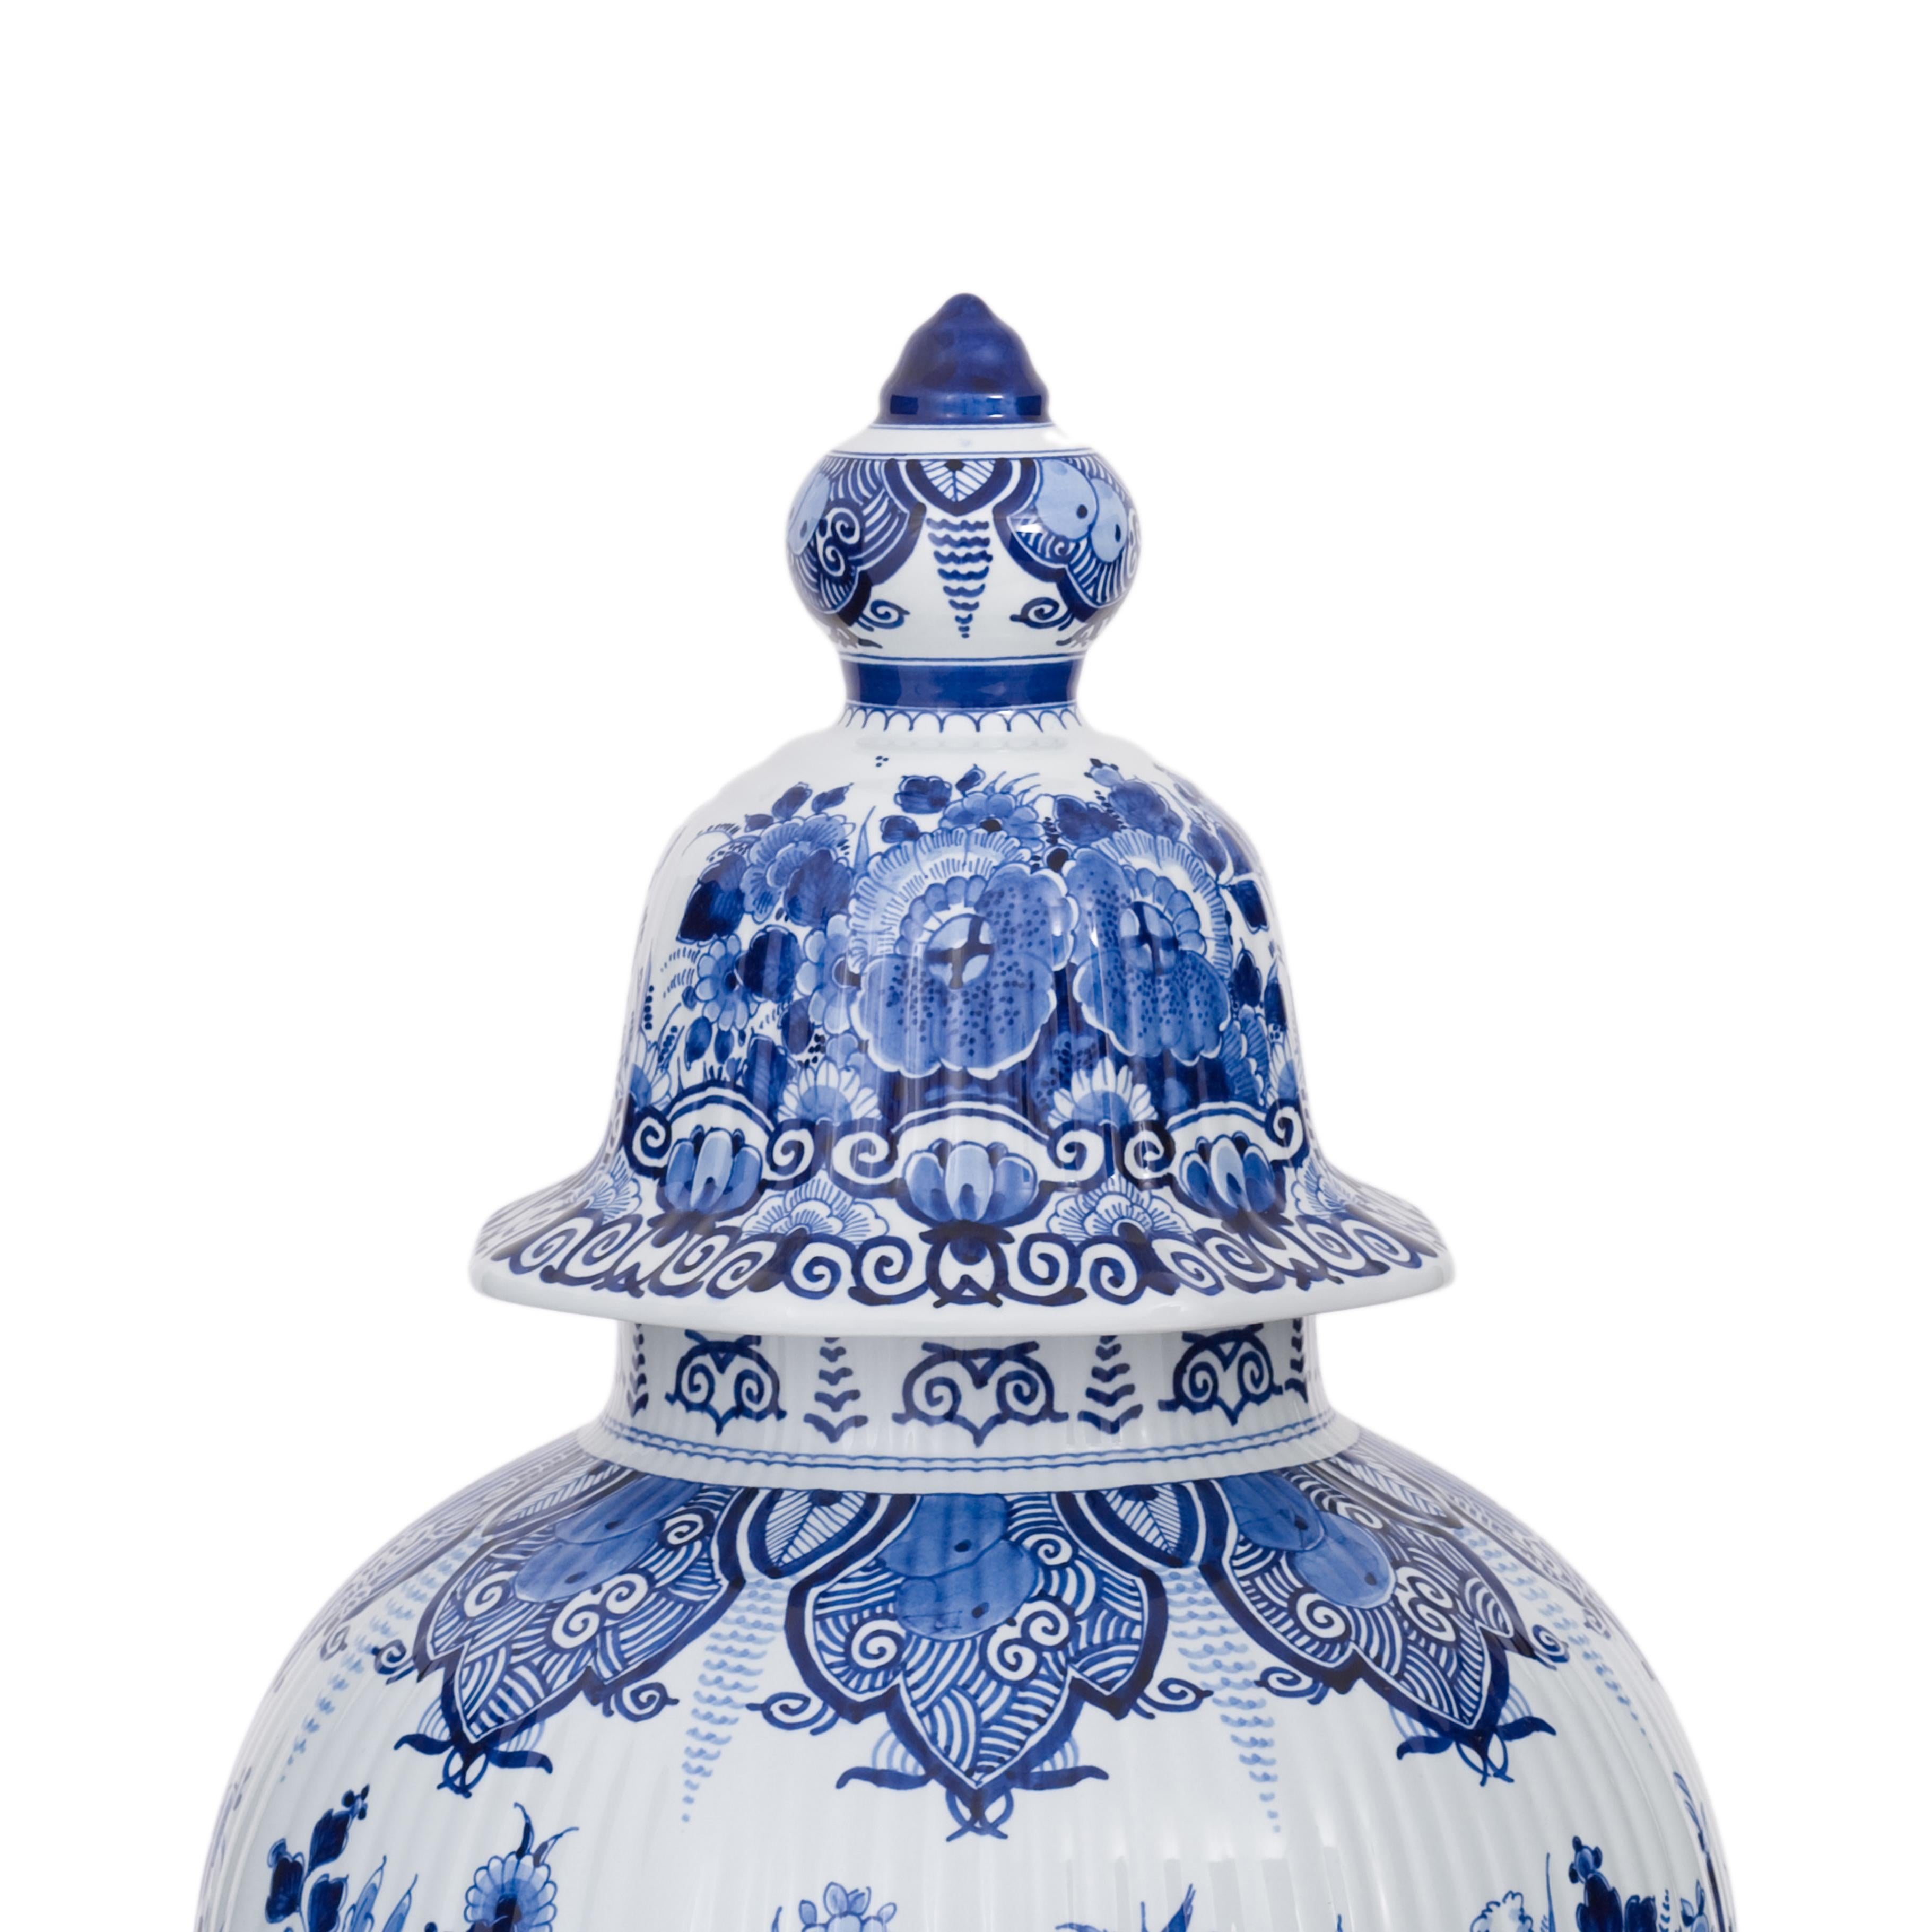 Hand-Crafted Dutch Delft Blue handpainted Jar with lid by Royal Delft, Original Blue collect. For Sale